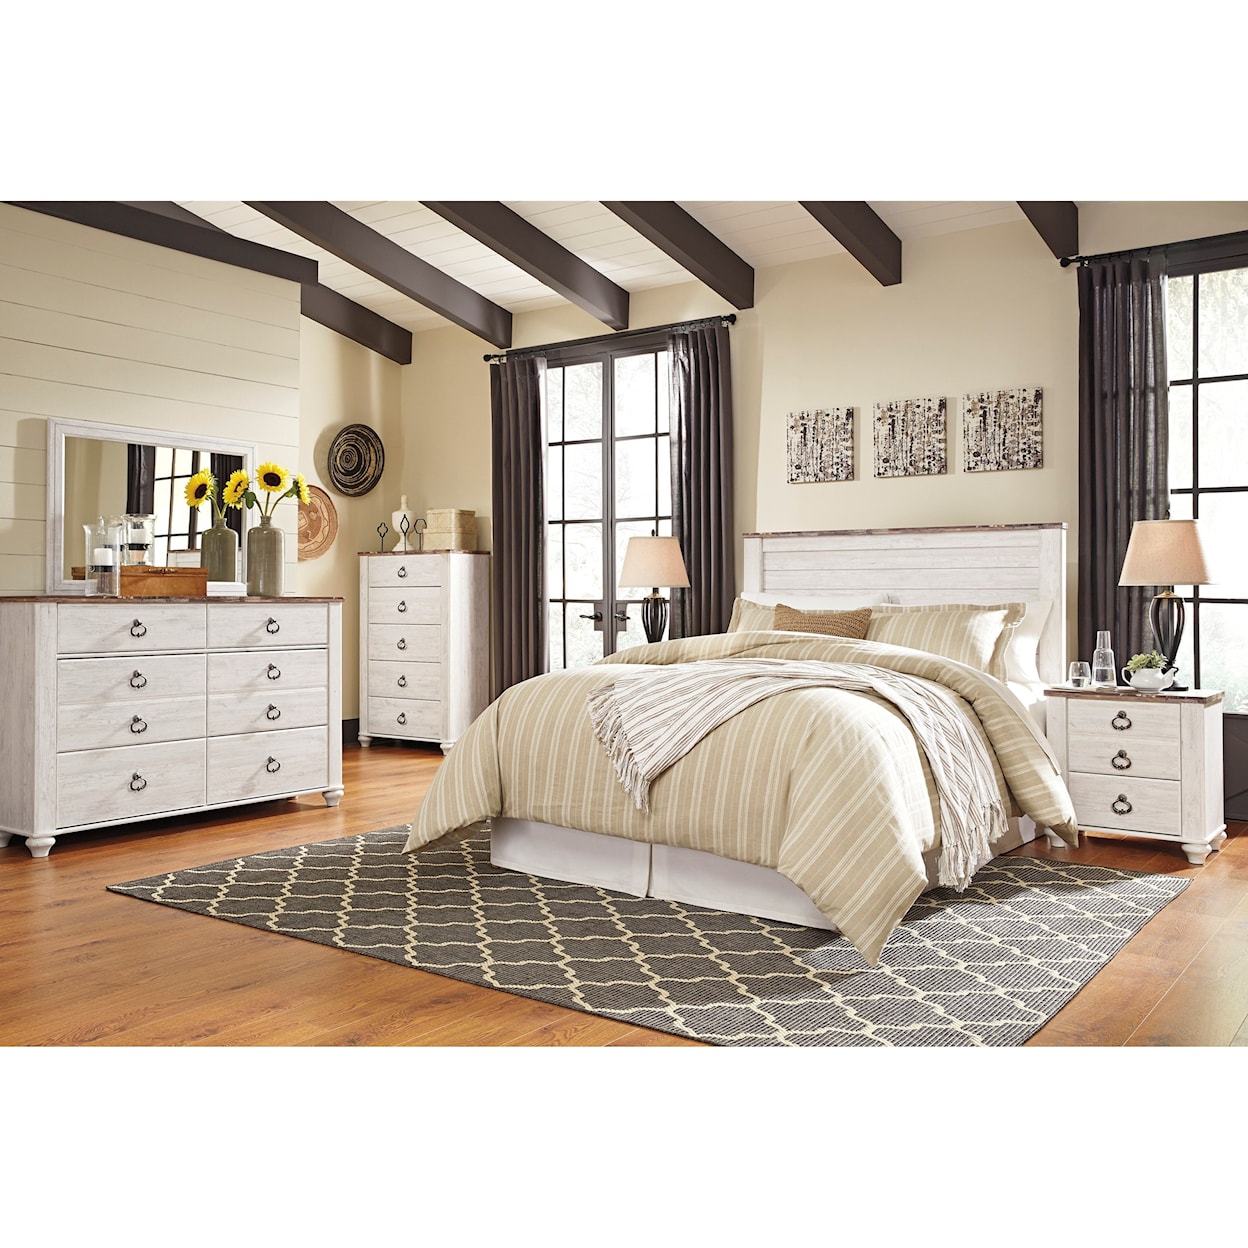 Ashley Furniture Signature Design Willowton Queen/Full Bedroom Group